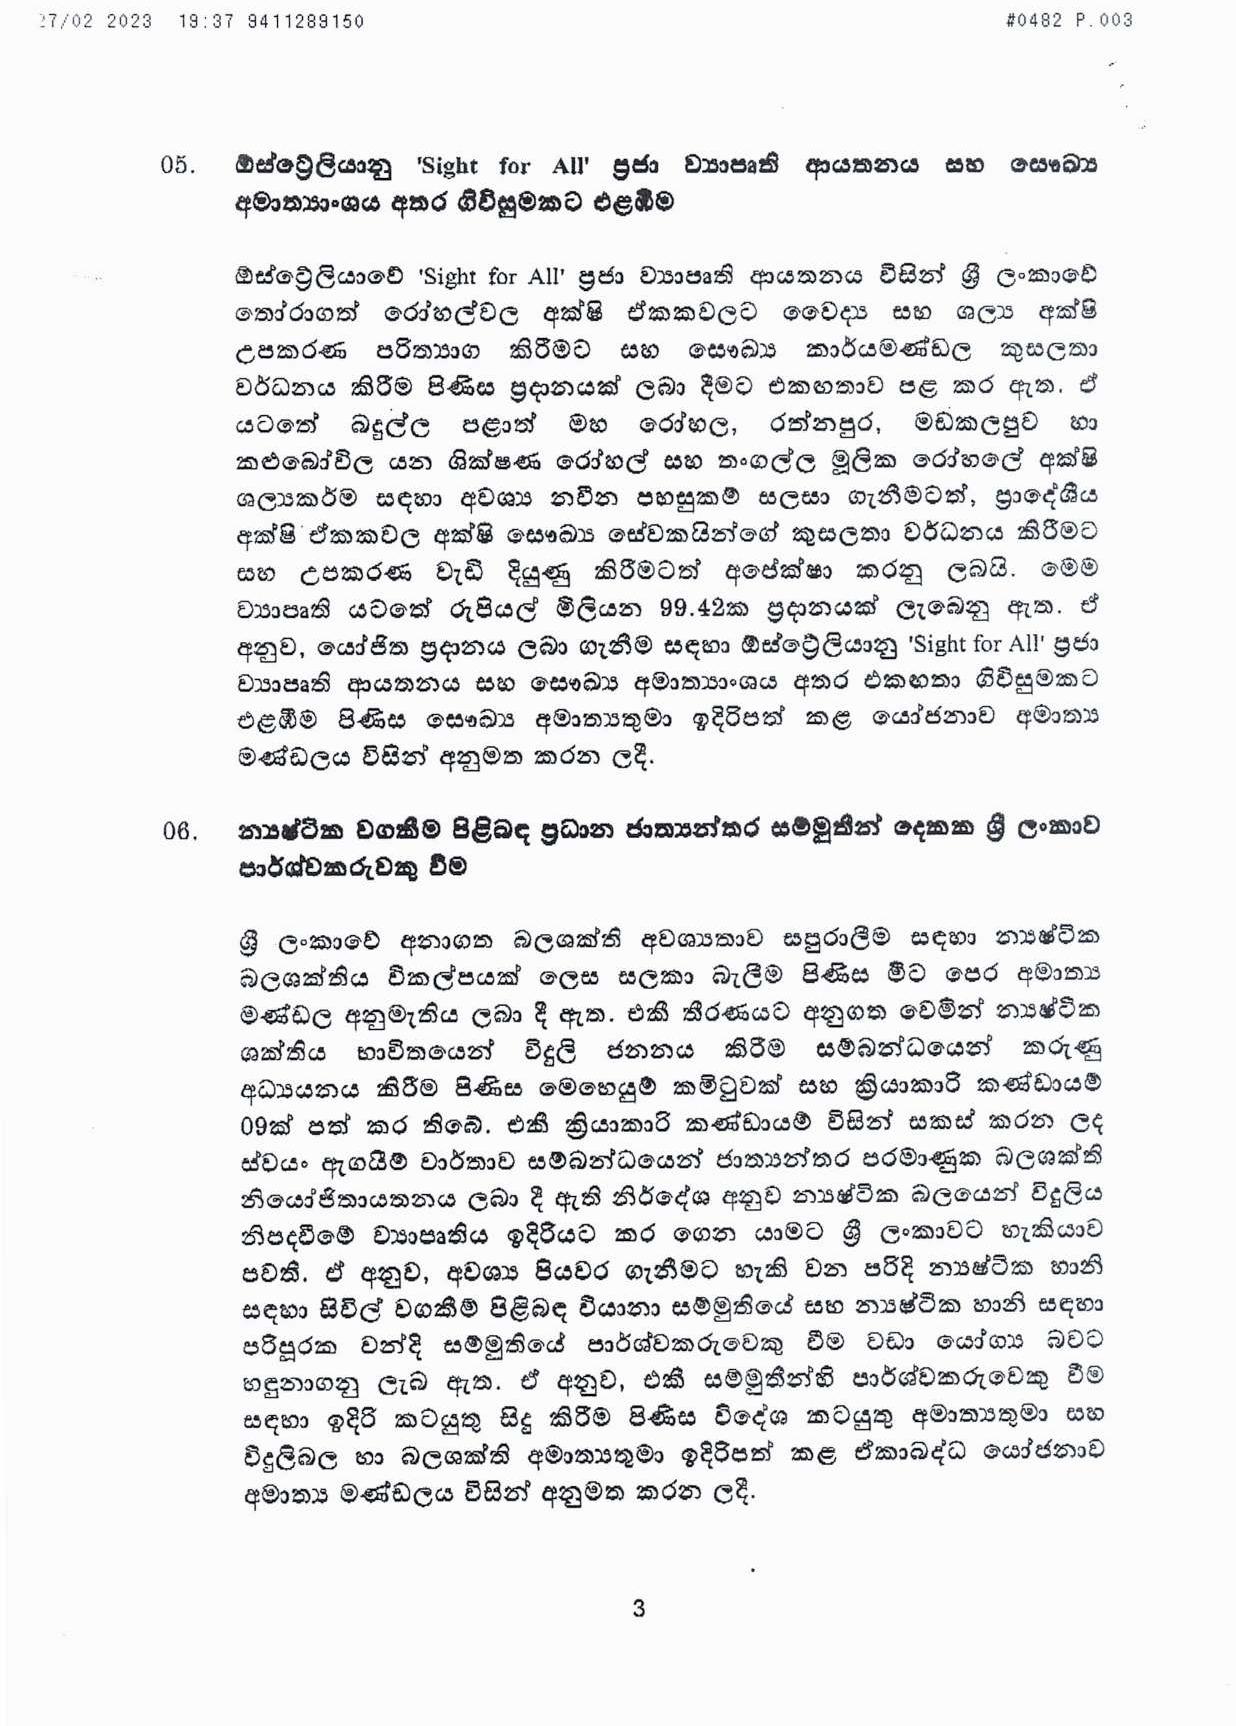 Cabinet Decision on 27.07.2023 1 page 003